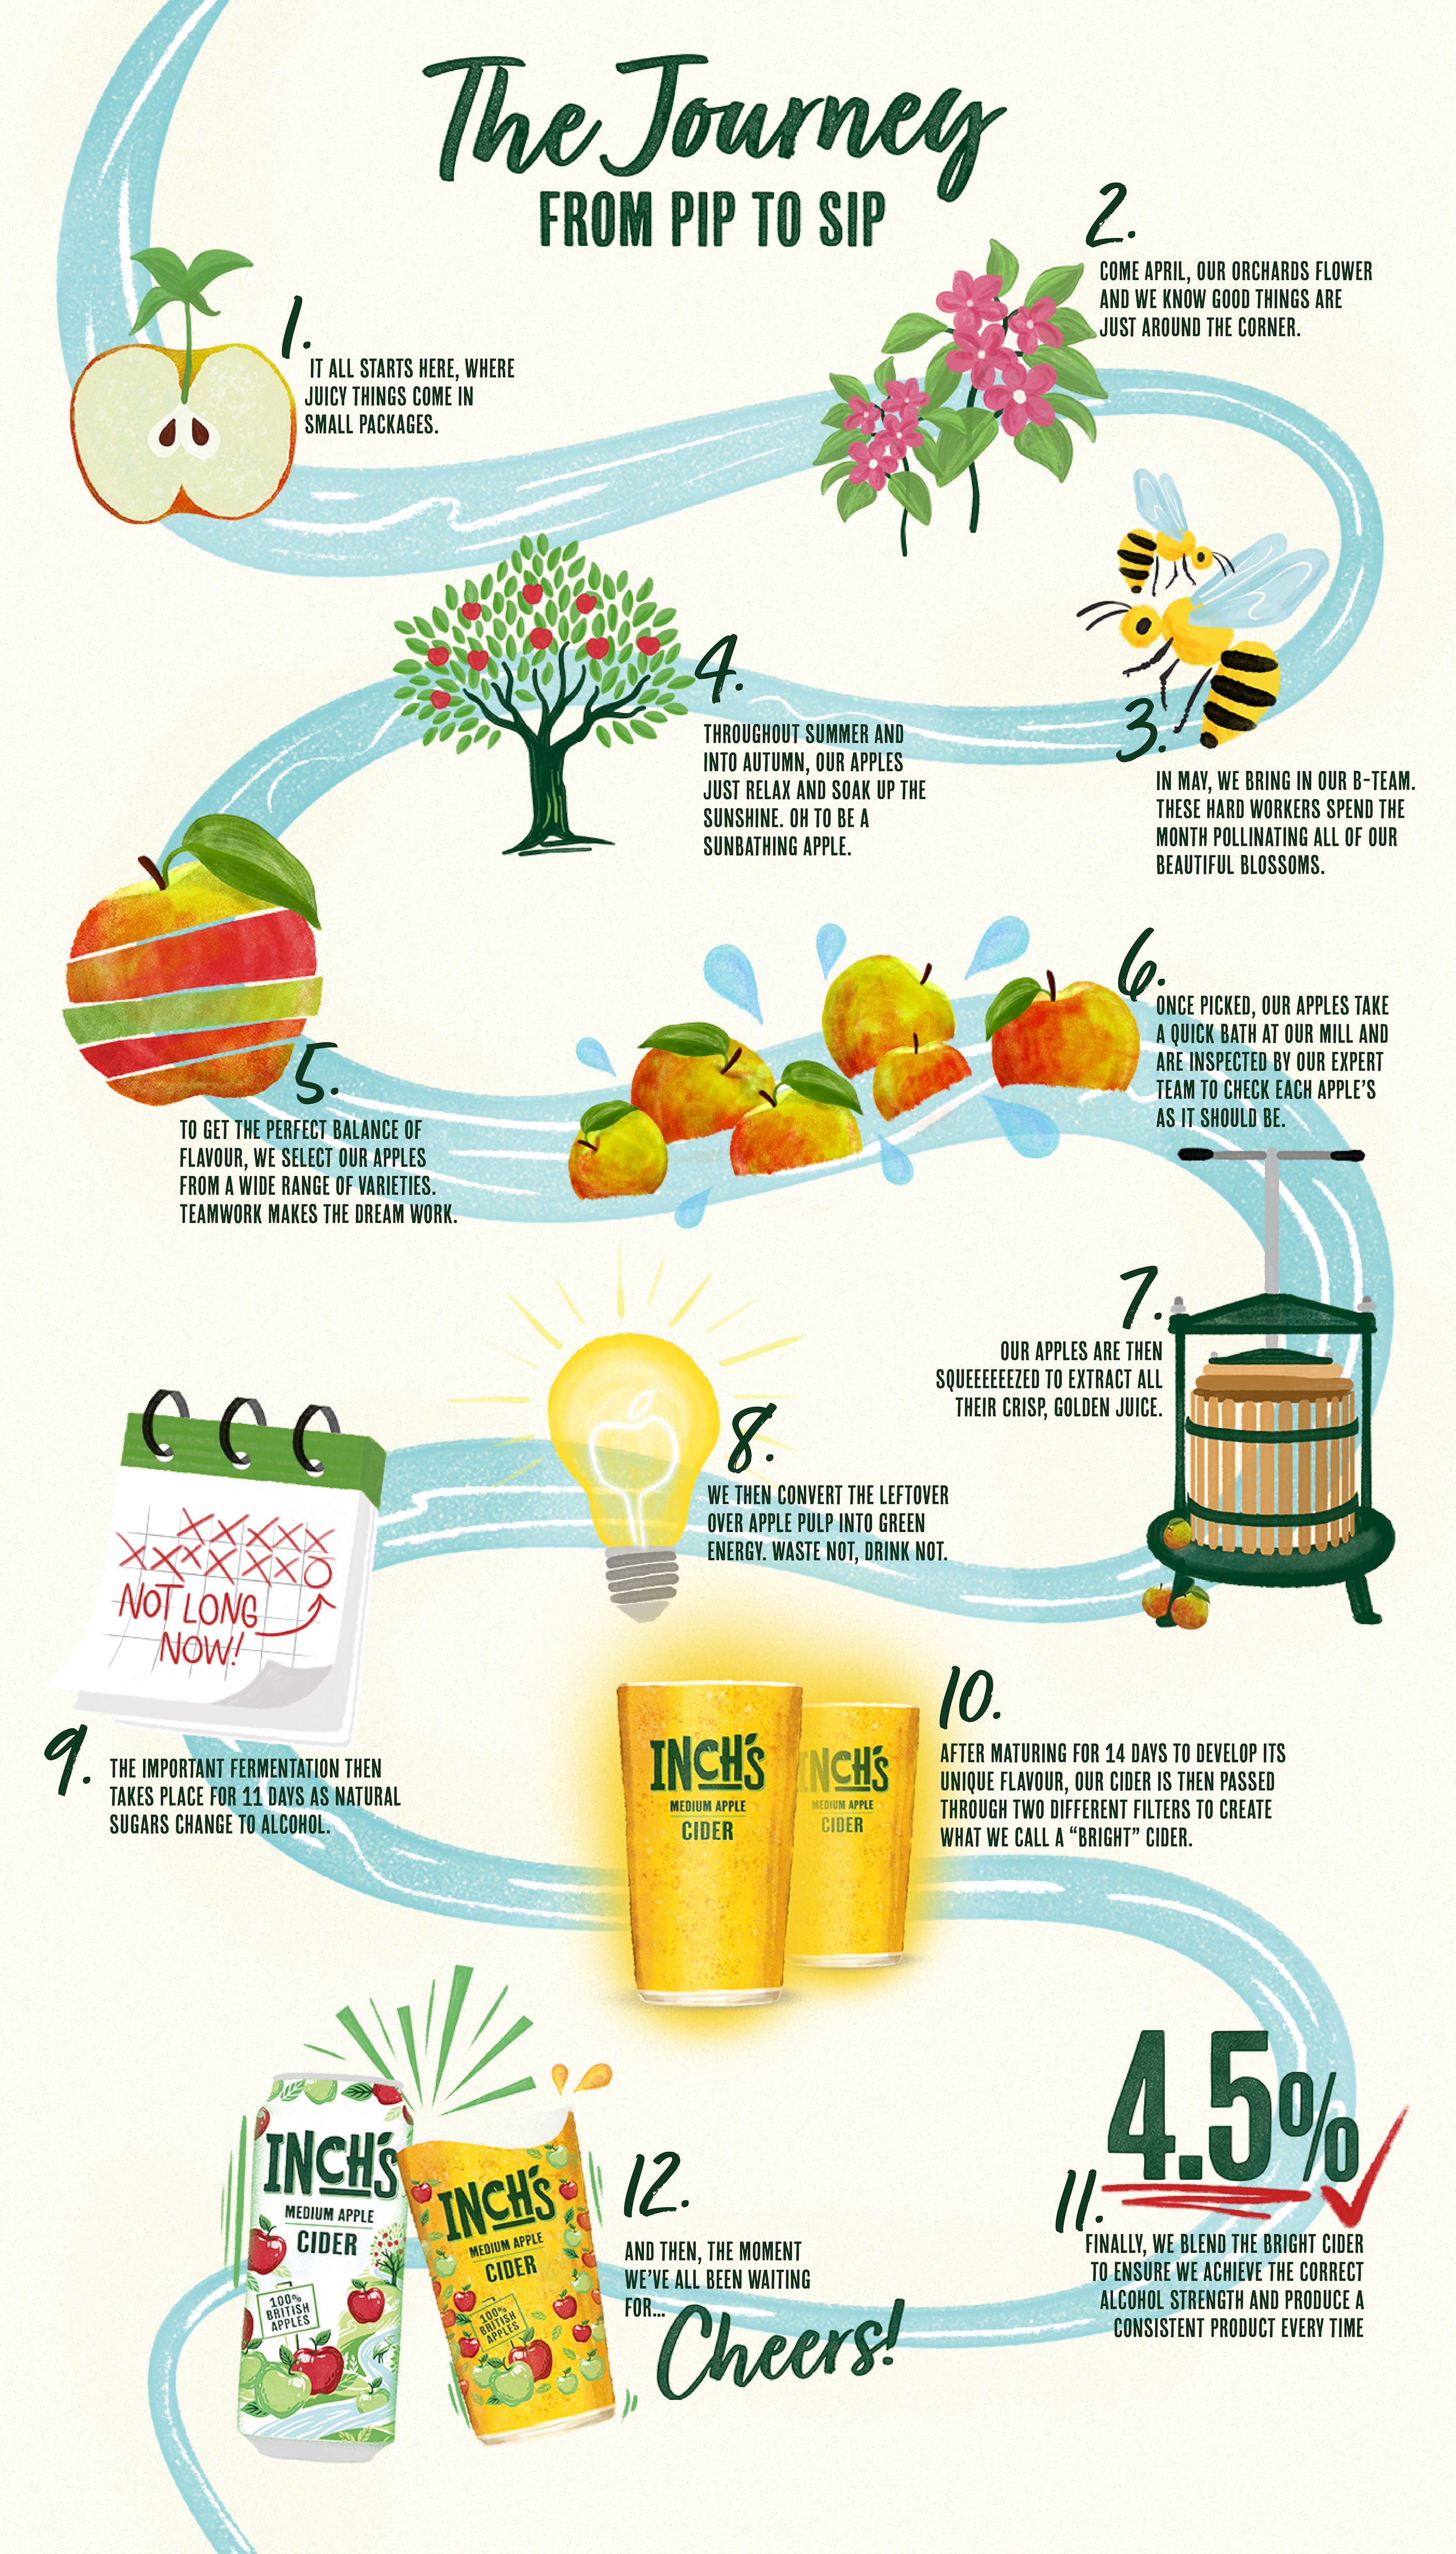 Inch's cider making process visual